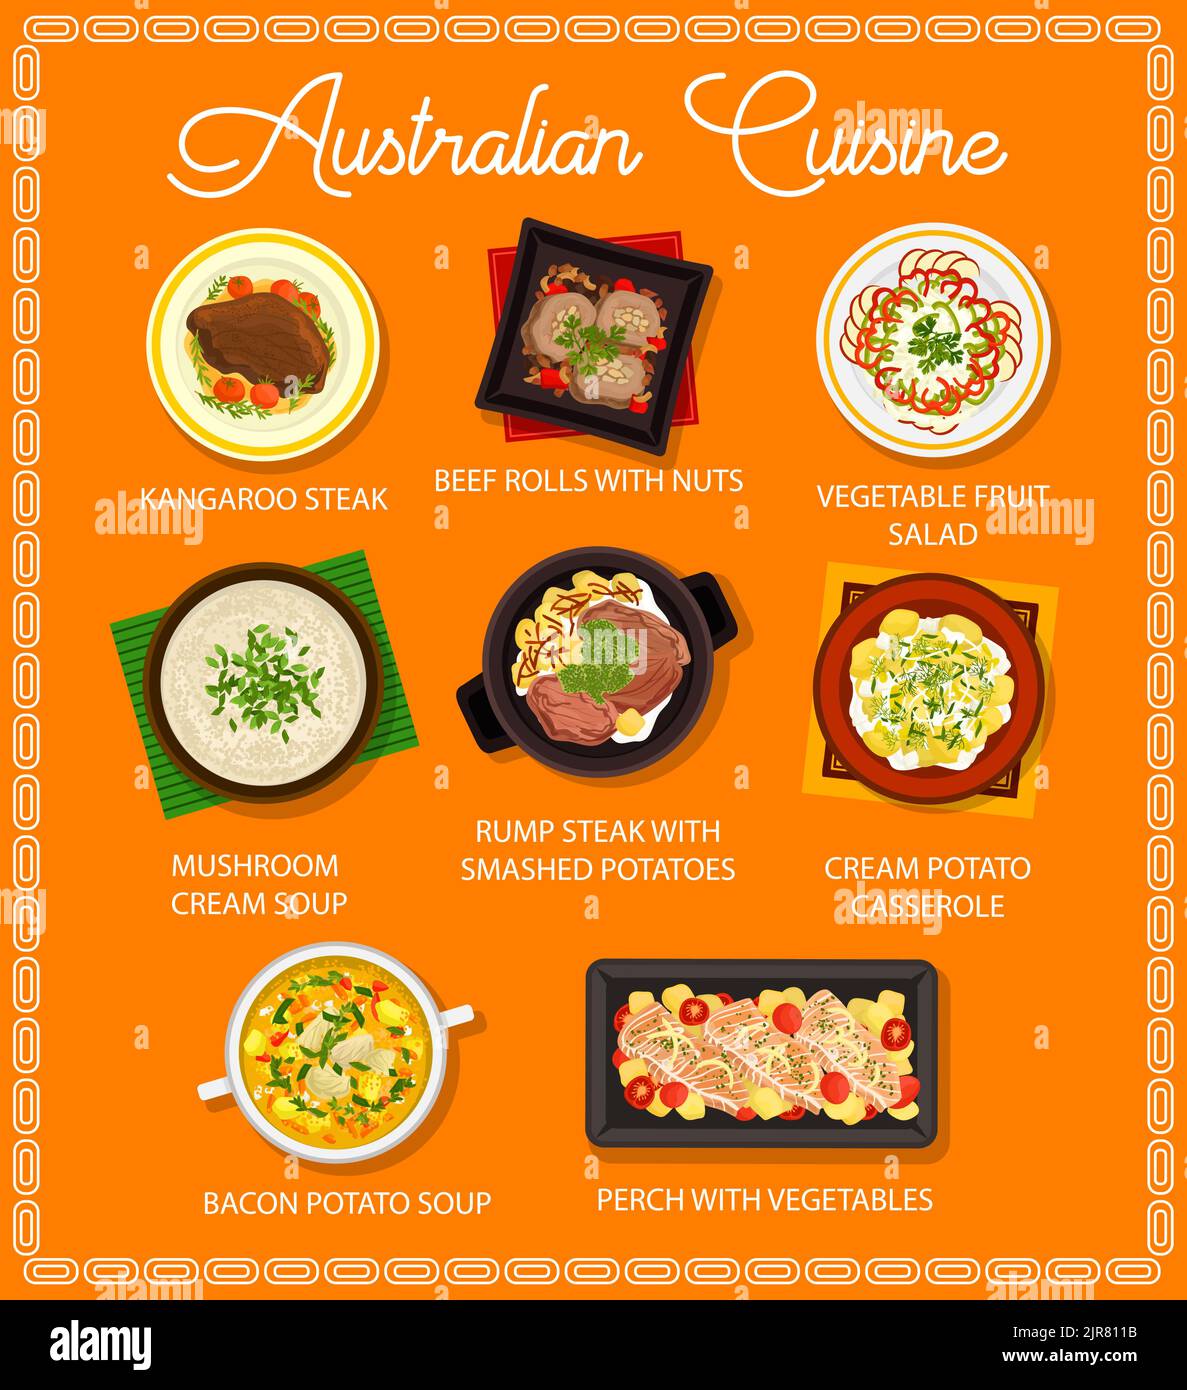 Australian cuisine restaurant menu with vector bbq meat, fish and vegetable food dishes. Barbecue kangaroo and beef steaks, perch, beef rolls and mushroom cream soup, fruit salad and potato casserole Stock Vector